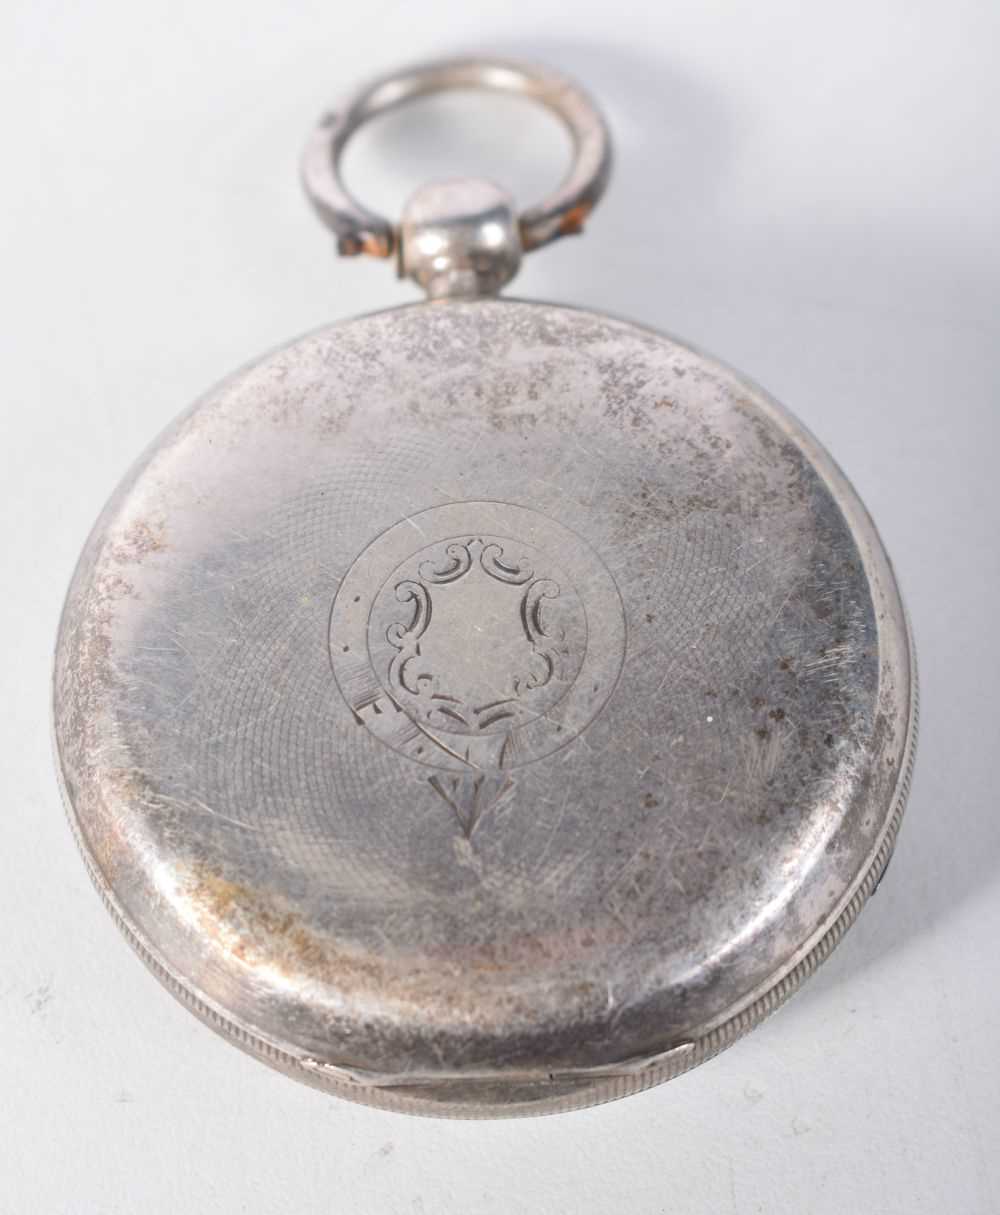 A VICTORIAN SILVER POCKET WATCH. Chester 1895. 154.7 grams. 5 cm diameter. - Image 2 of 4